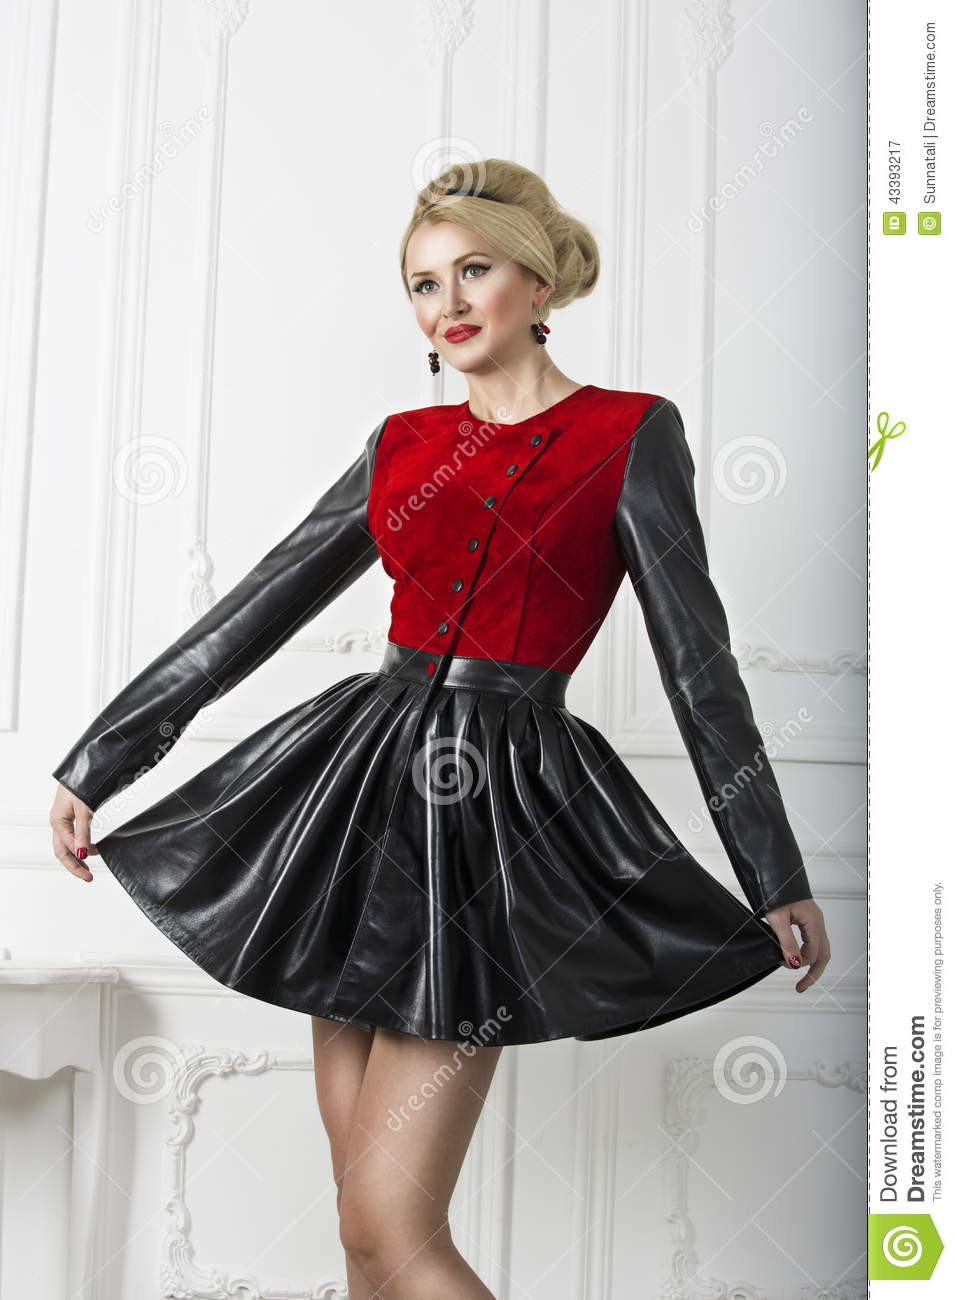 Pins Up Style
 Pinup Fashion Woman Smiling In Dress Stock Image